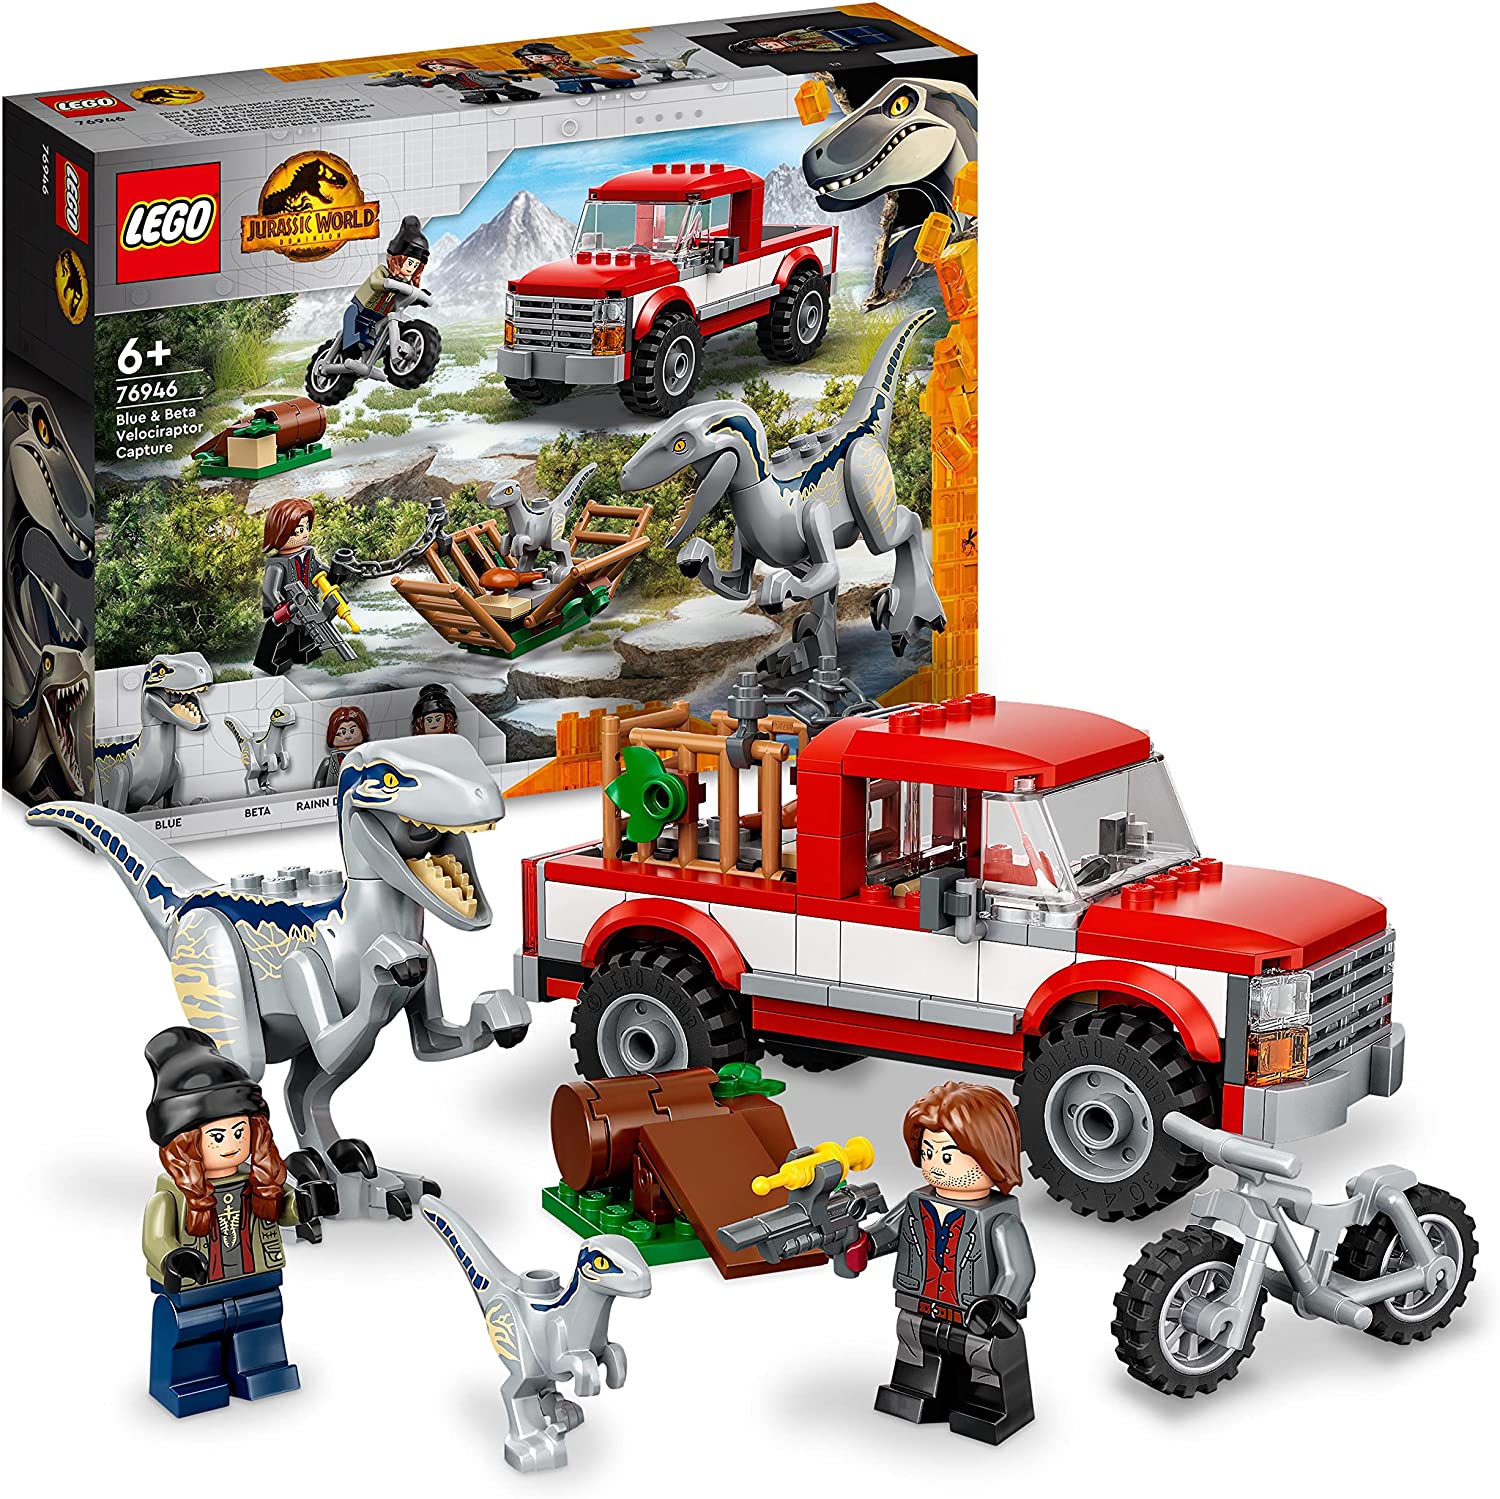 LEGO 76946 Jurassic World Blue & Beta in the Velociraptor Trap, Toy Car with Dinosaur Figures for Children from 6 Years